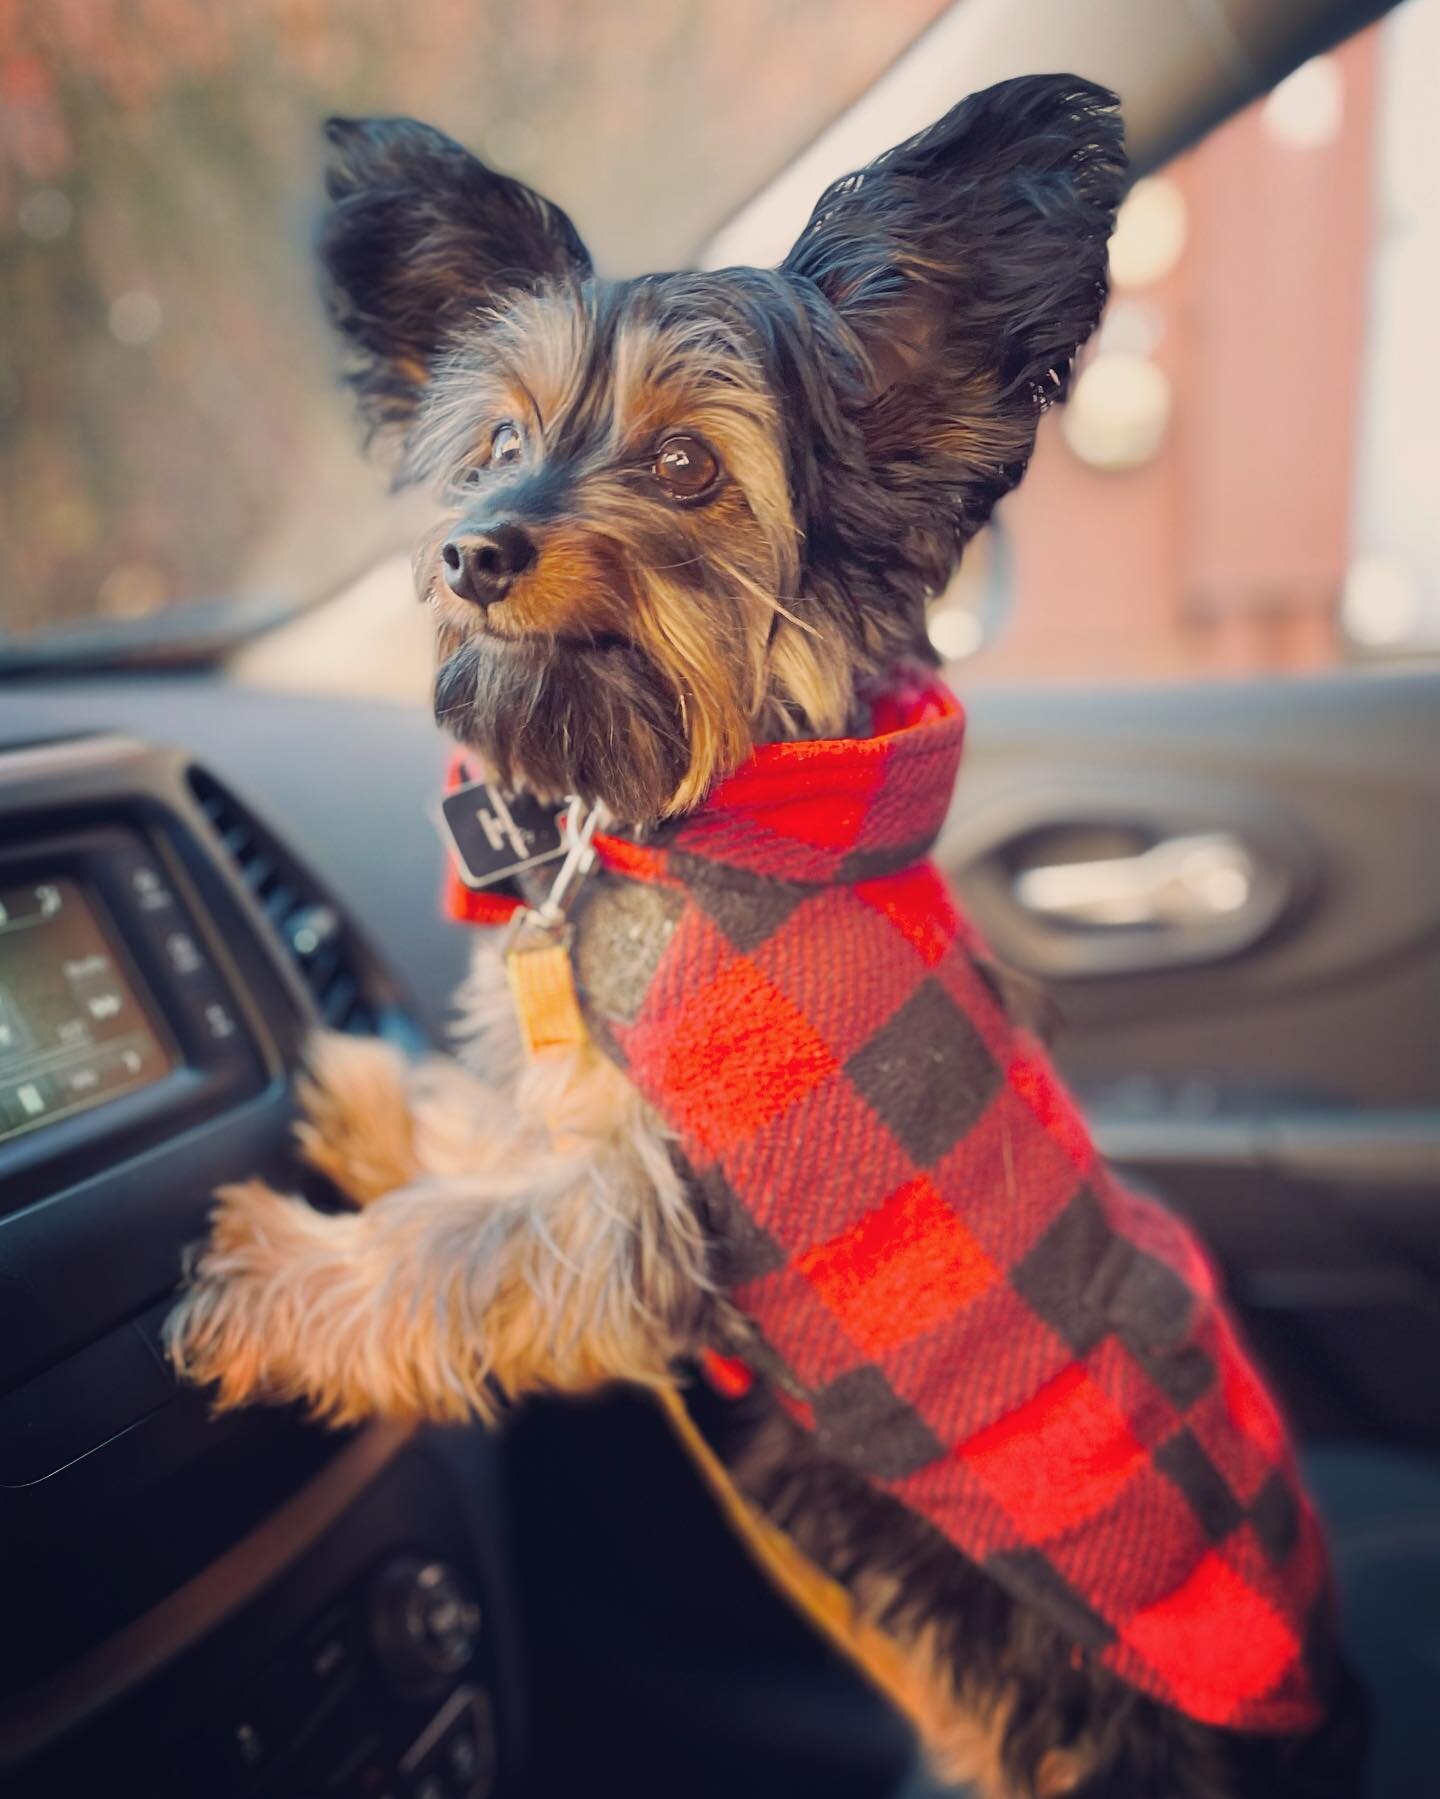 Hi ho, hi ho, it&rsquo;s off to work therapy we go! 

#dogsofinstagram #dogsofthelou #yorkies #esa #therapydog #cutedogs